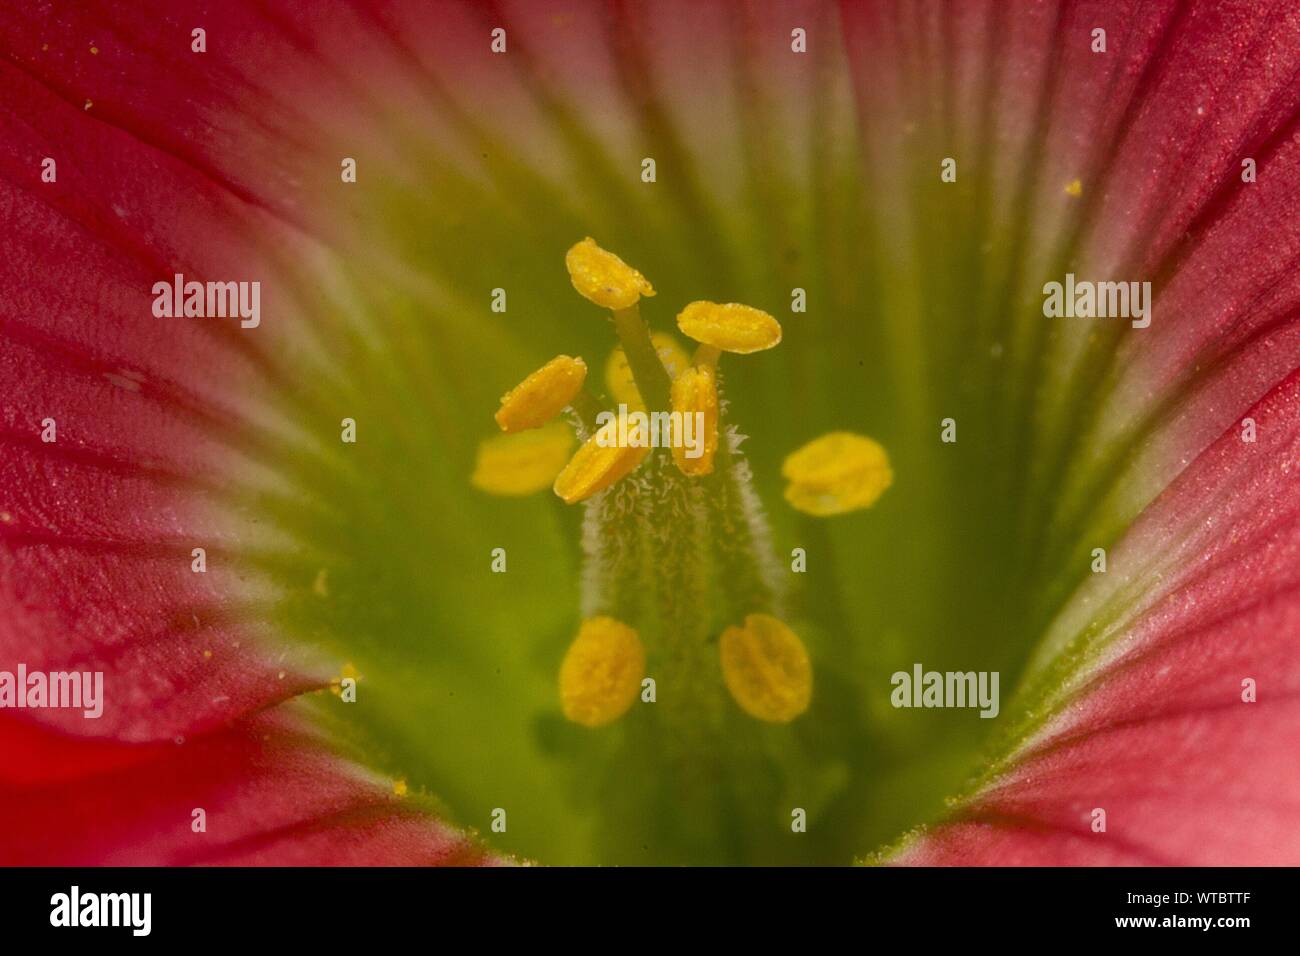 Close-up Of Pink Flower With Yellow Stamens Stock Photo